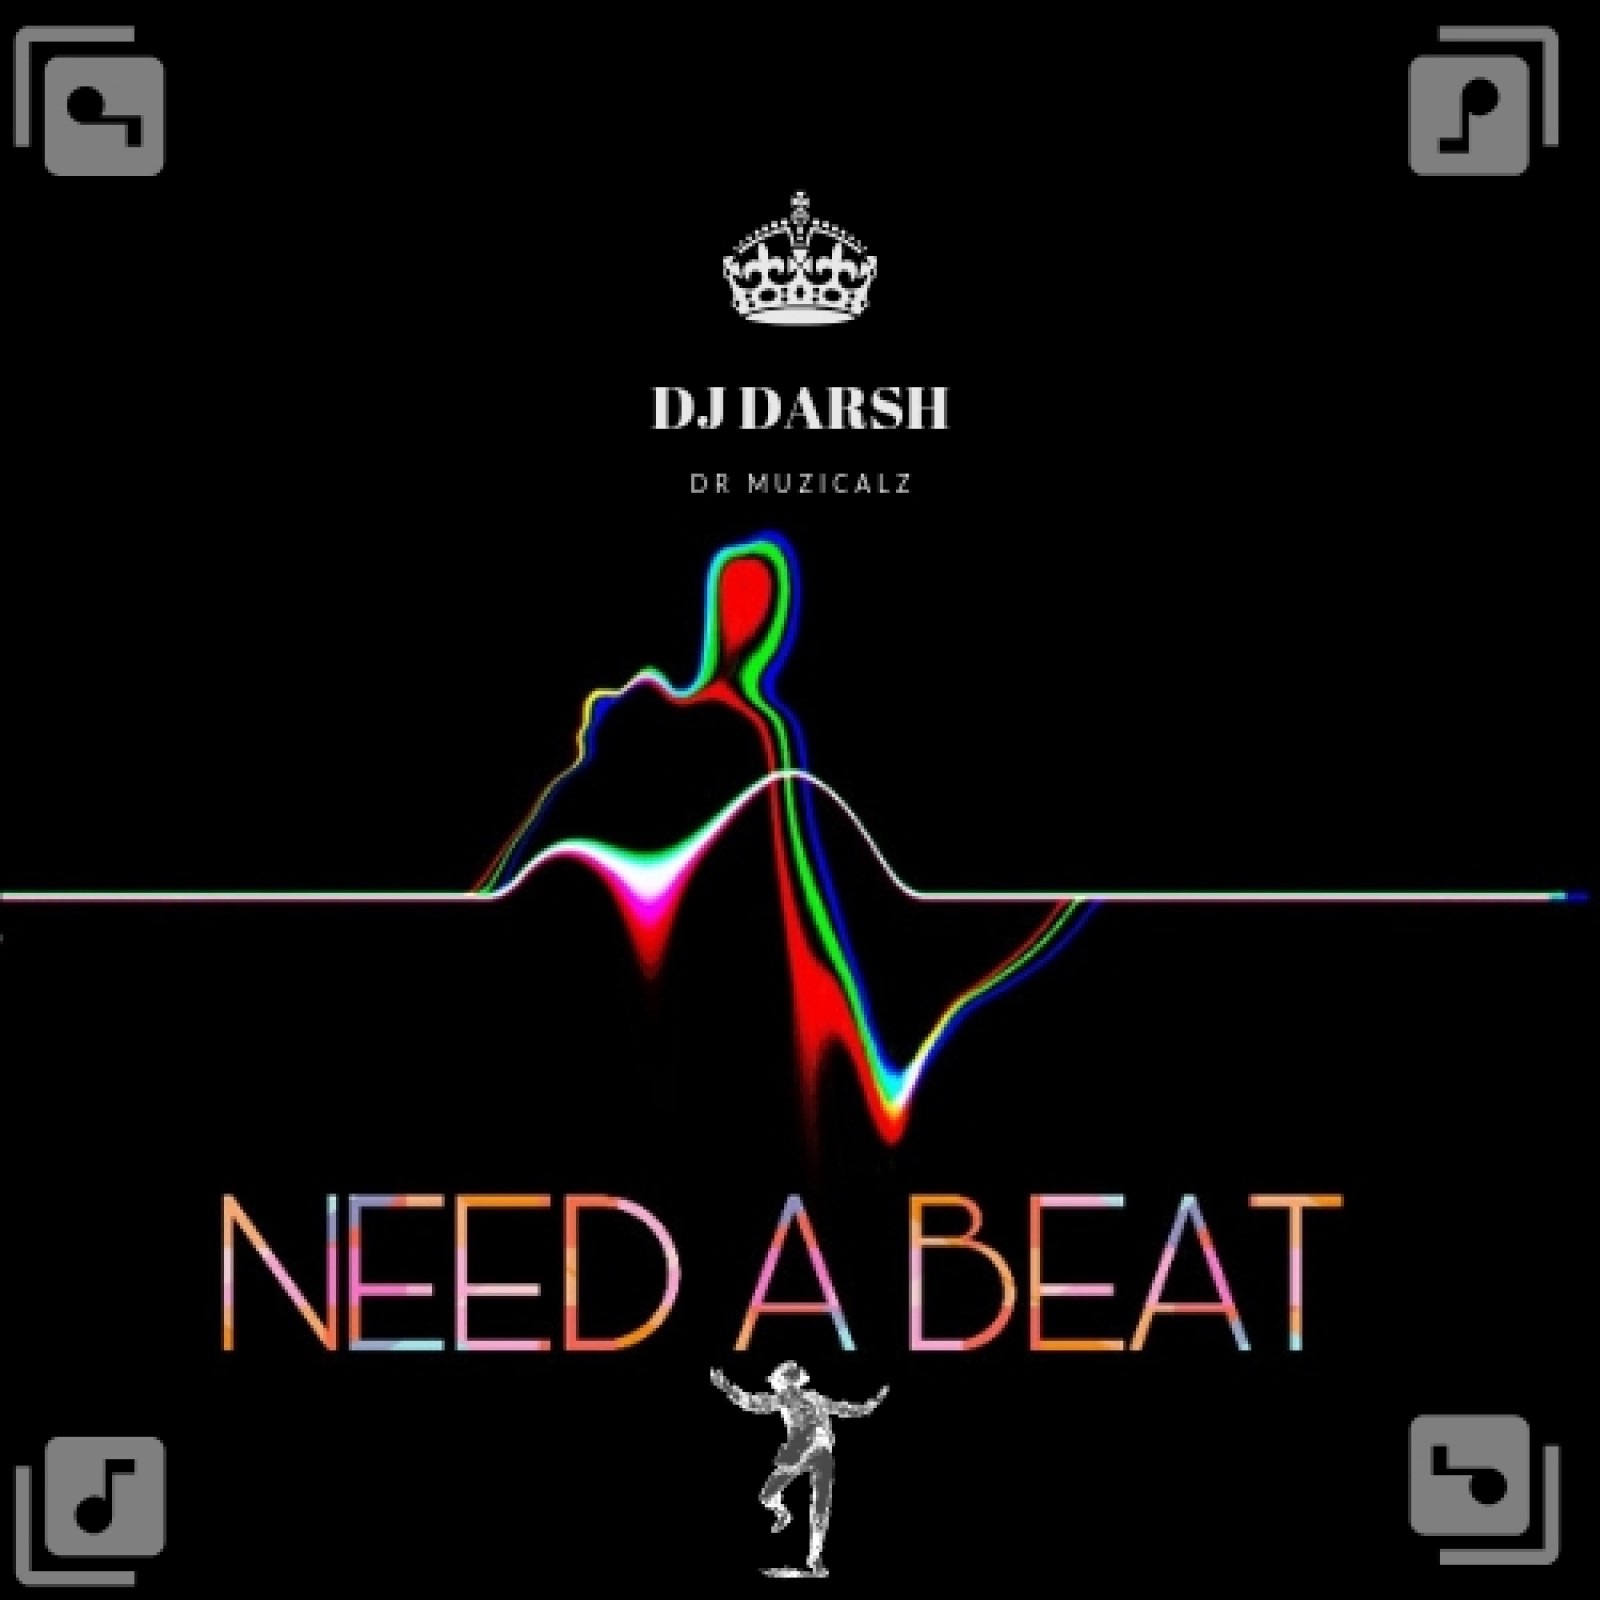 Need for beat